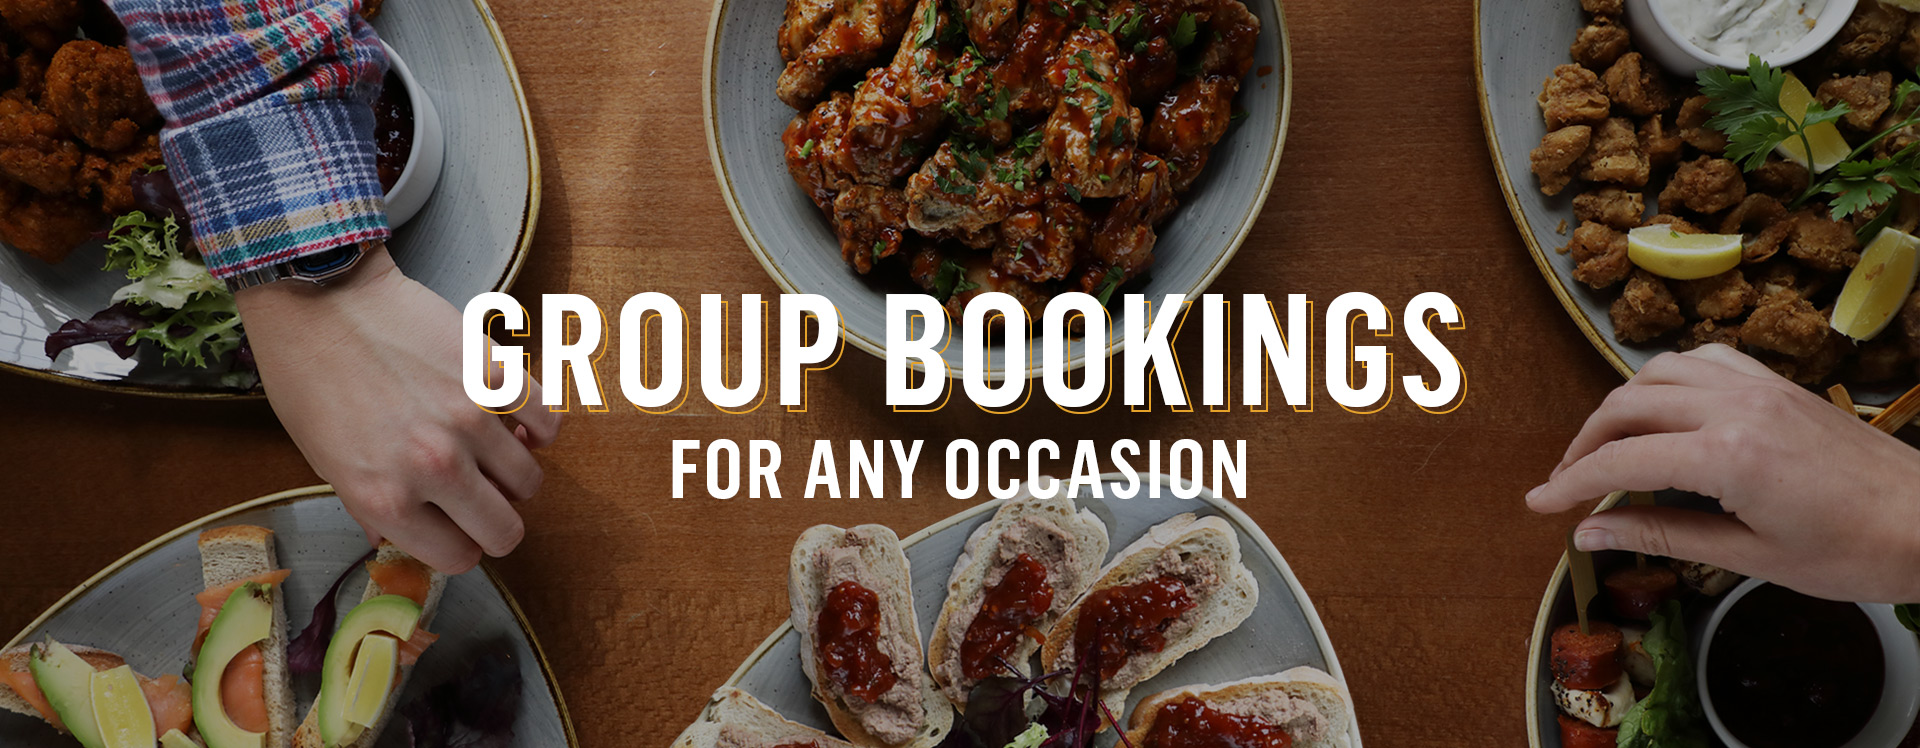 Group Bookings at The Drum and Monkey